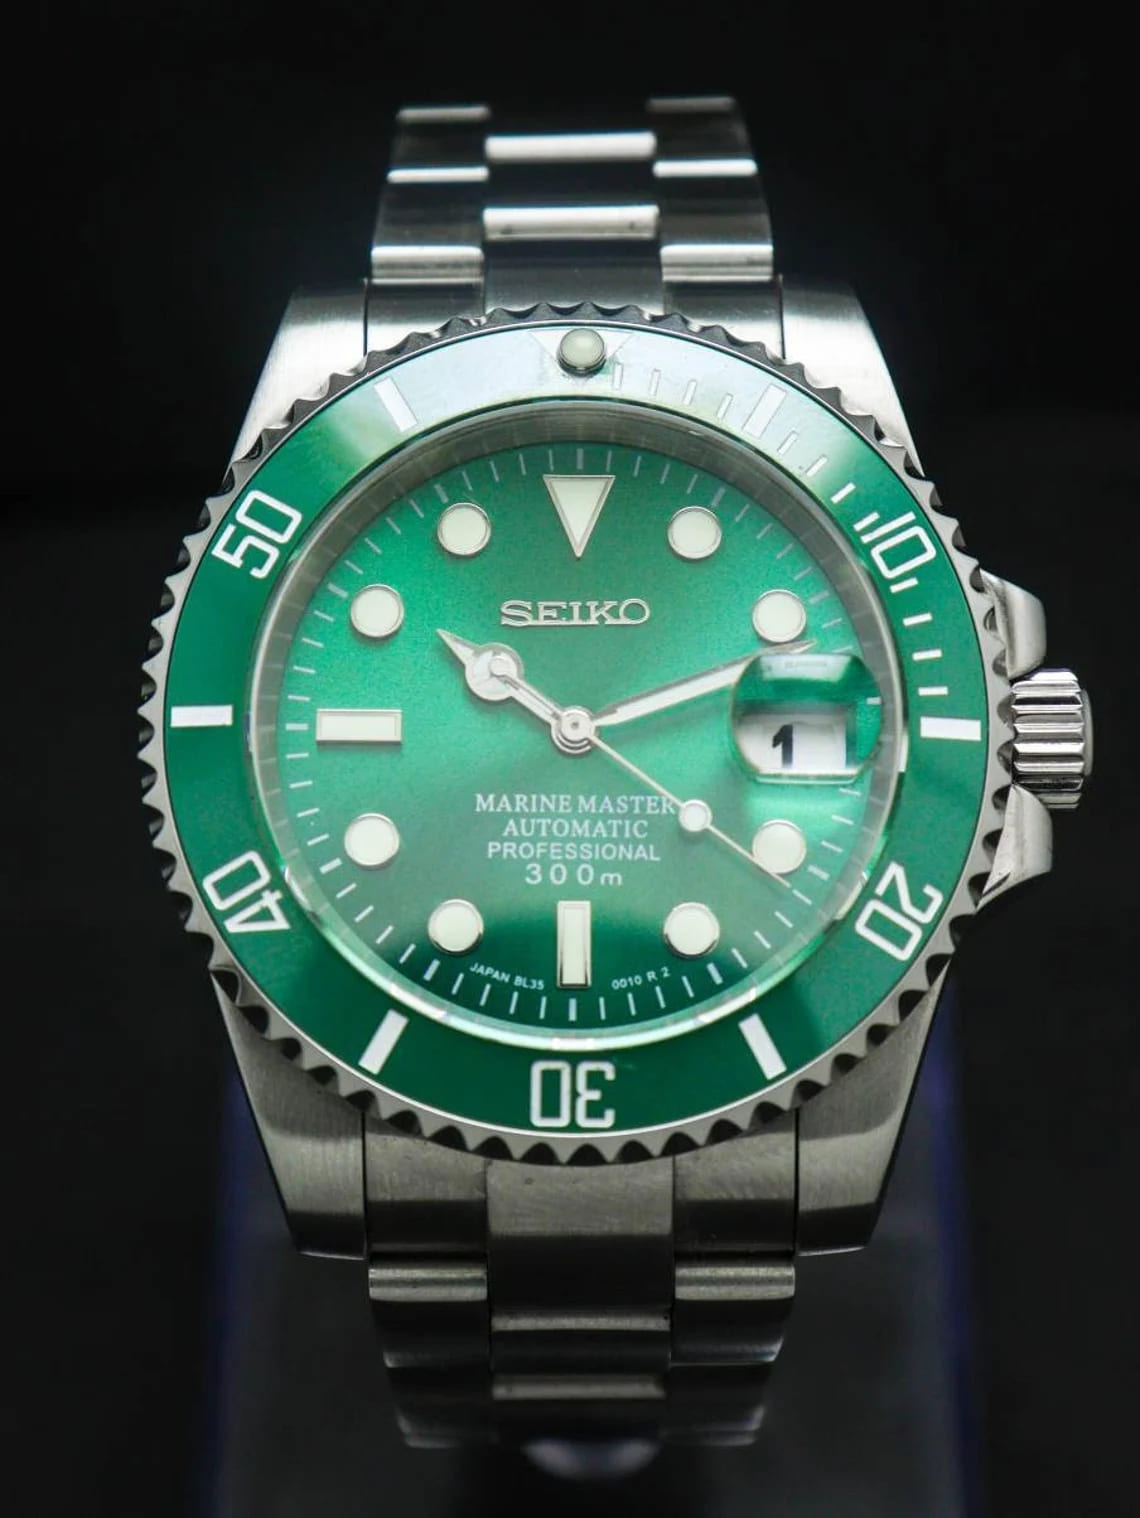 Custom Modded Seiko watches in Stock - Express Delivery Included